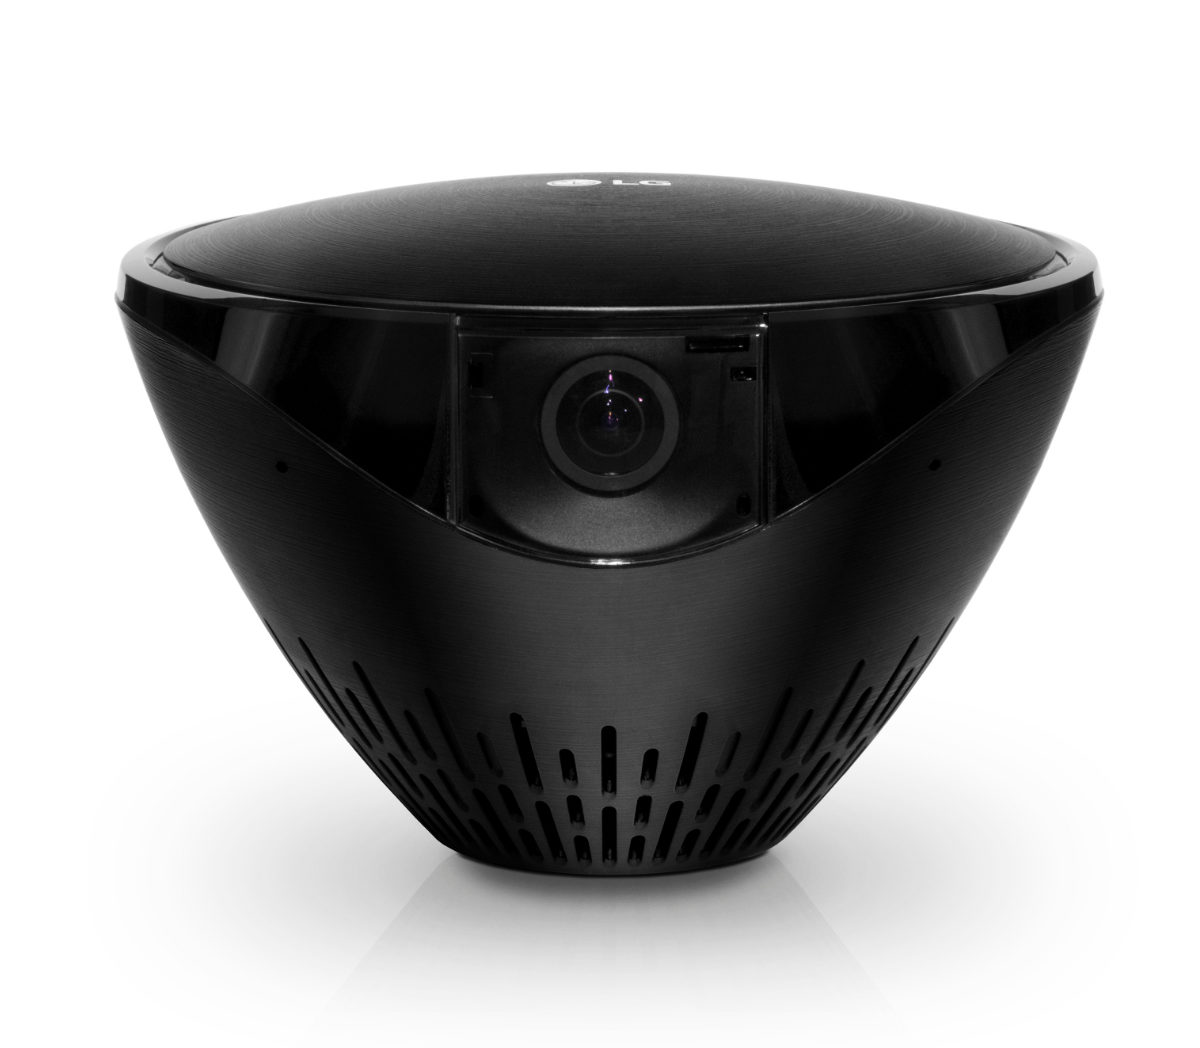 The Black case, smoked lens, and sculptural shape of the LG Smart Security Wireless Camera help to conceal its true purpose when placed in any inconspicuous spot in your home